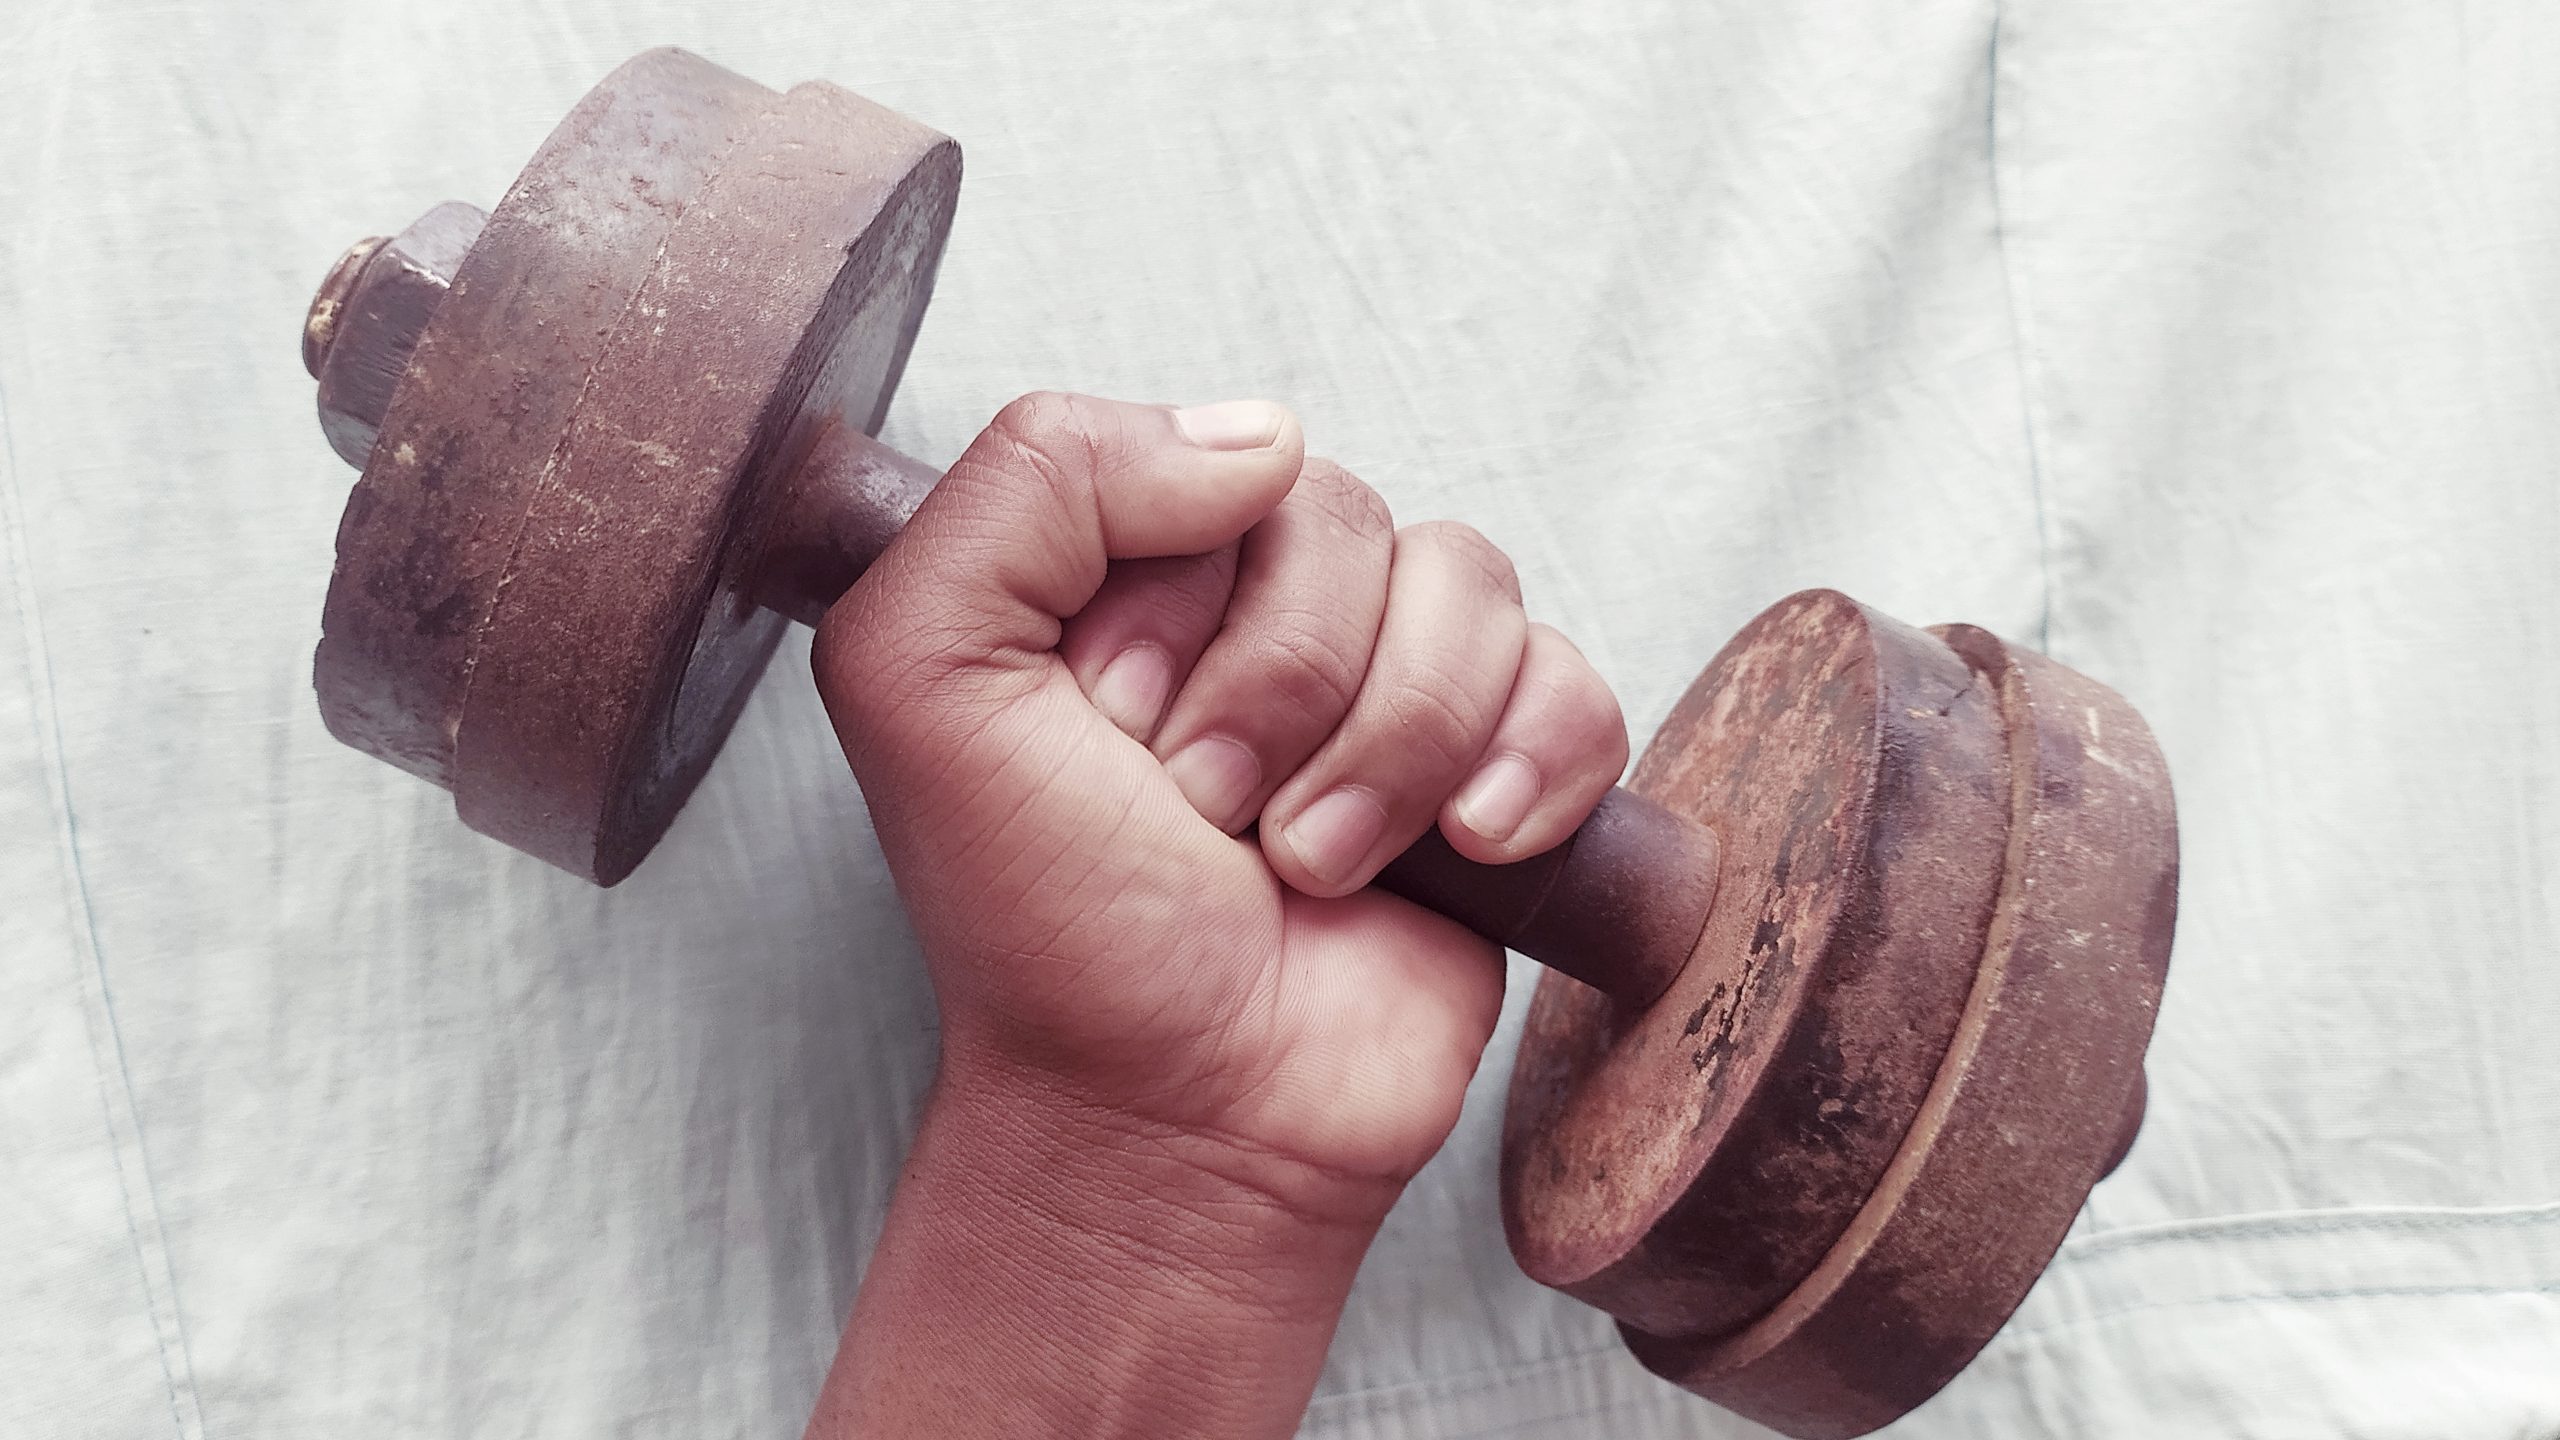 A dumbbell in hand